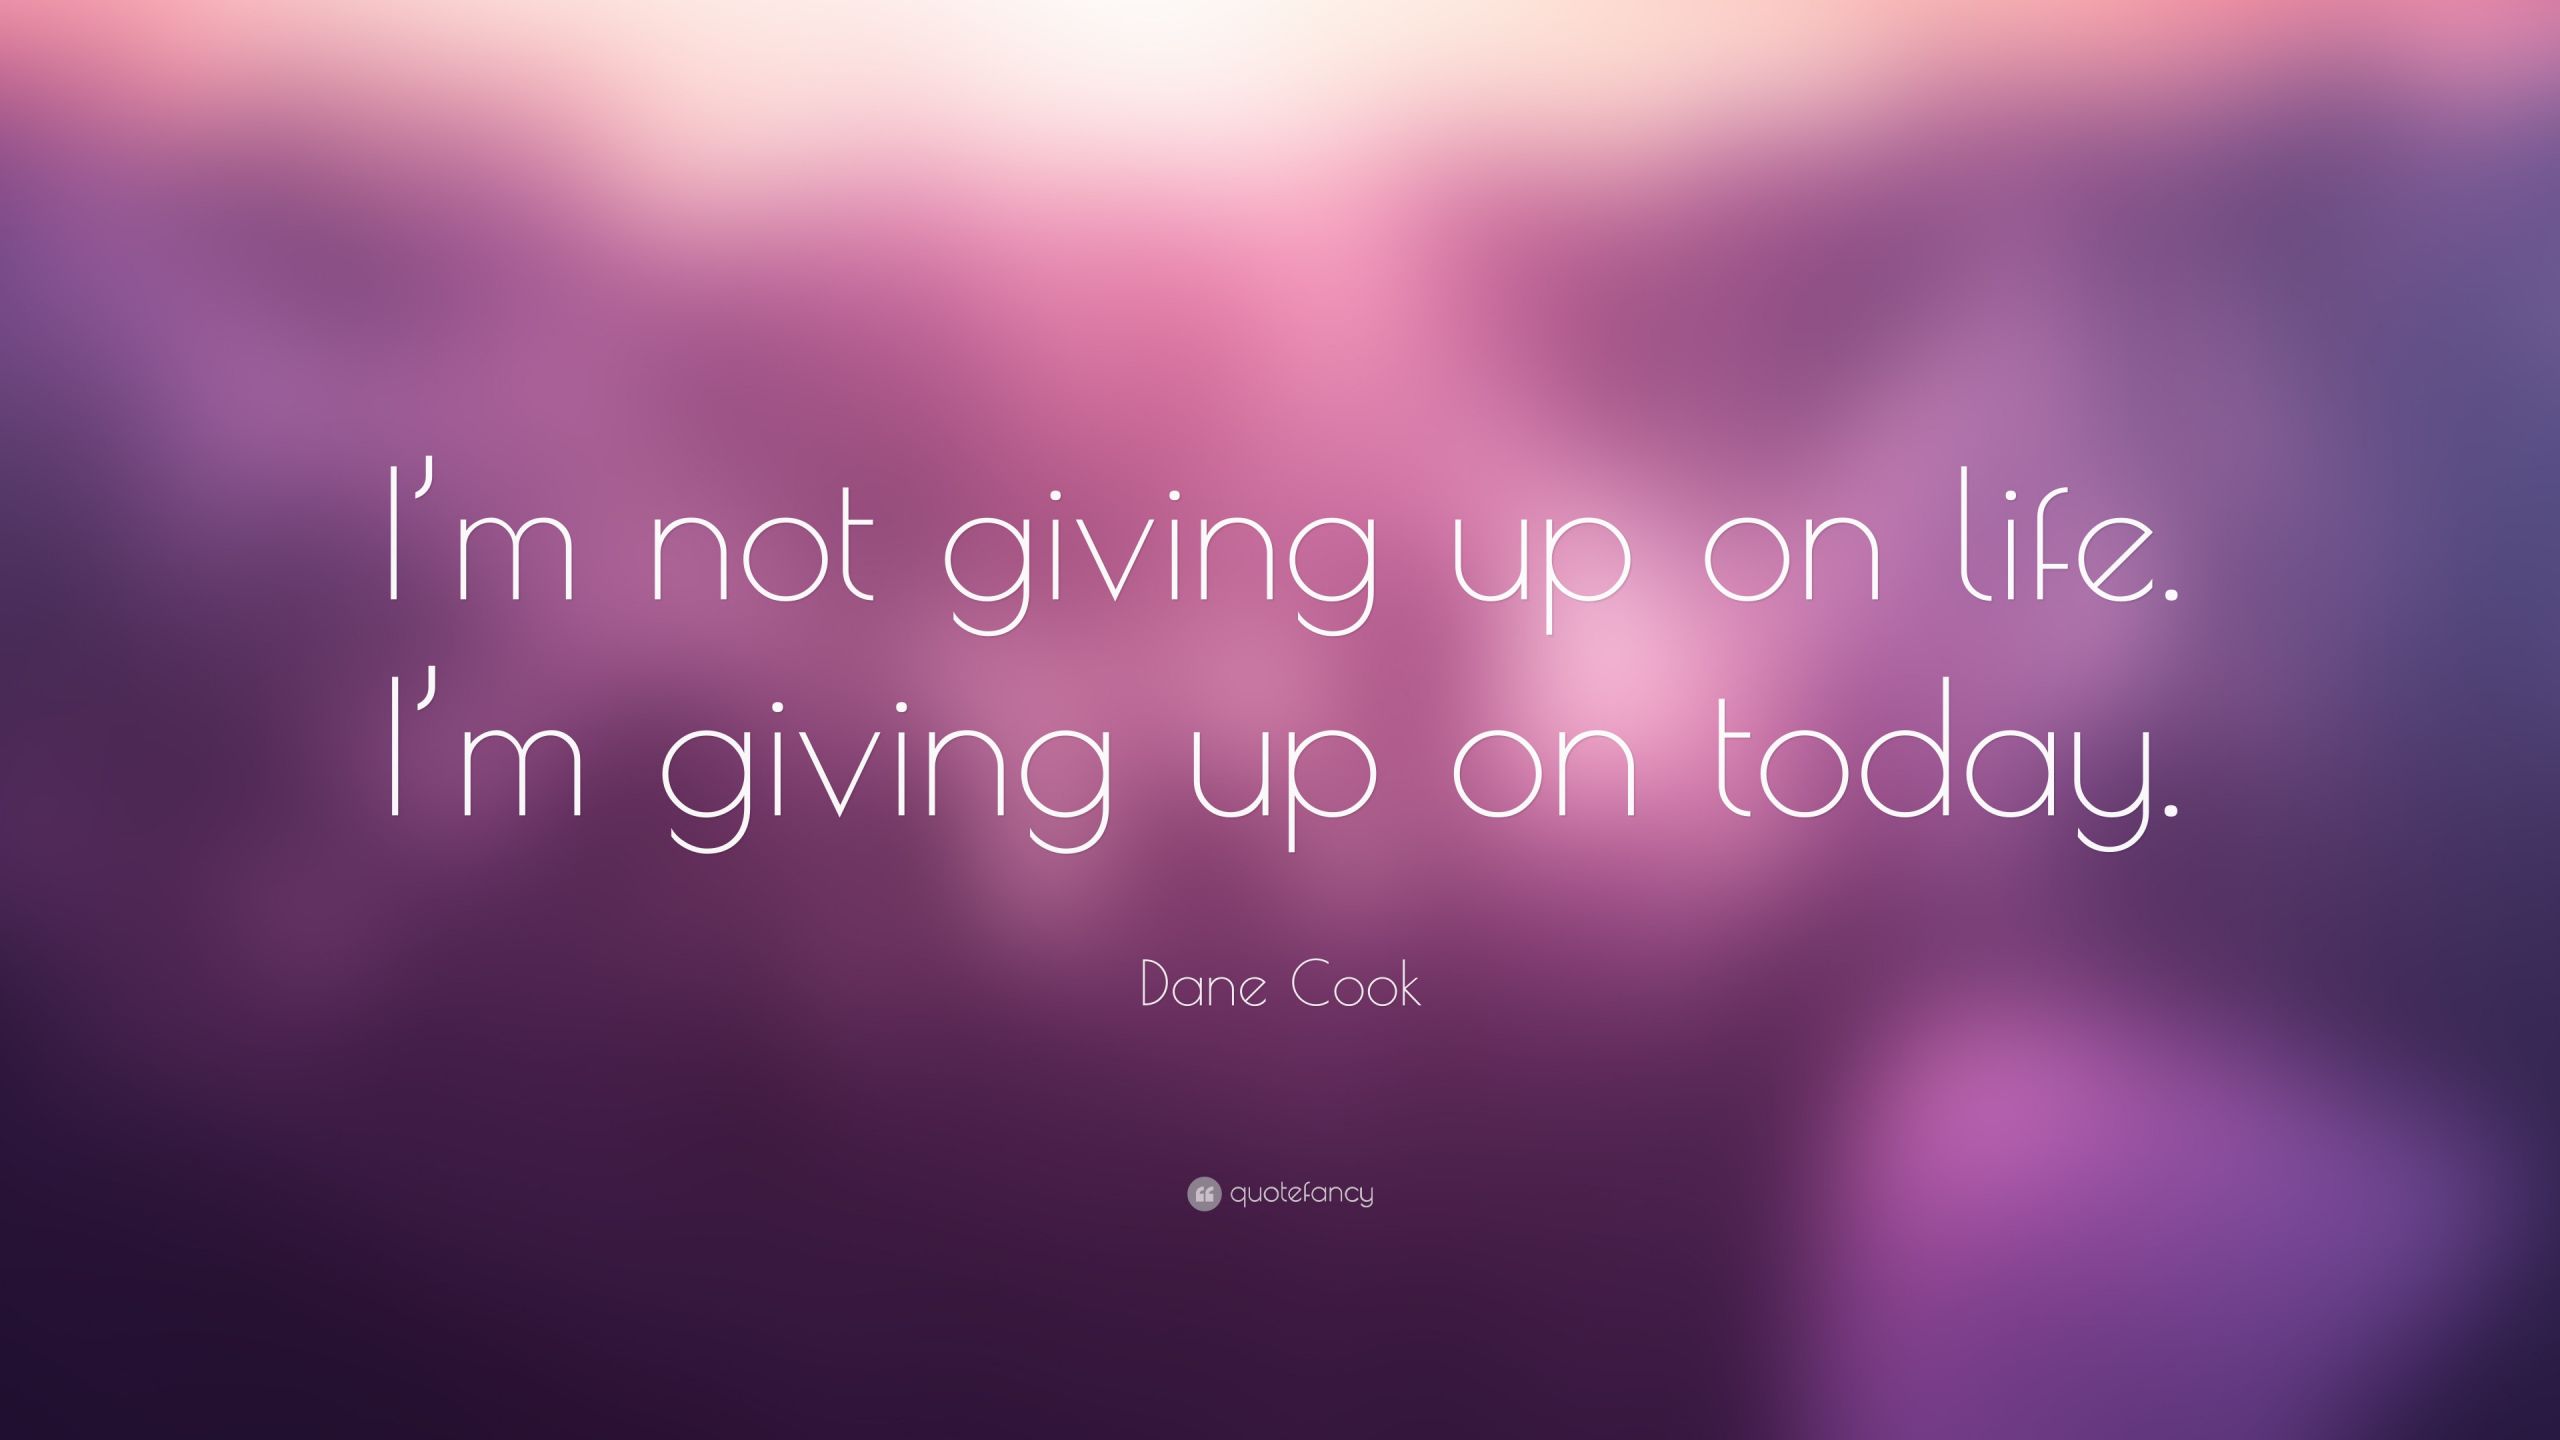 I Give Up On Life Quotes
 Not Giving Up Quotes 32 wallpapers Quotefancy